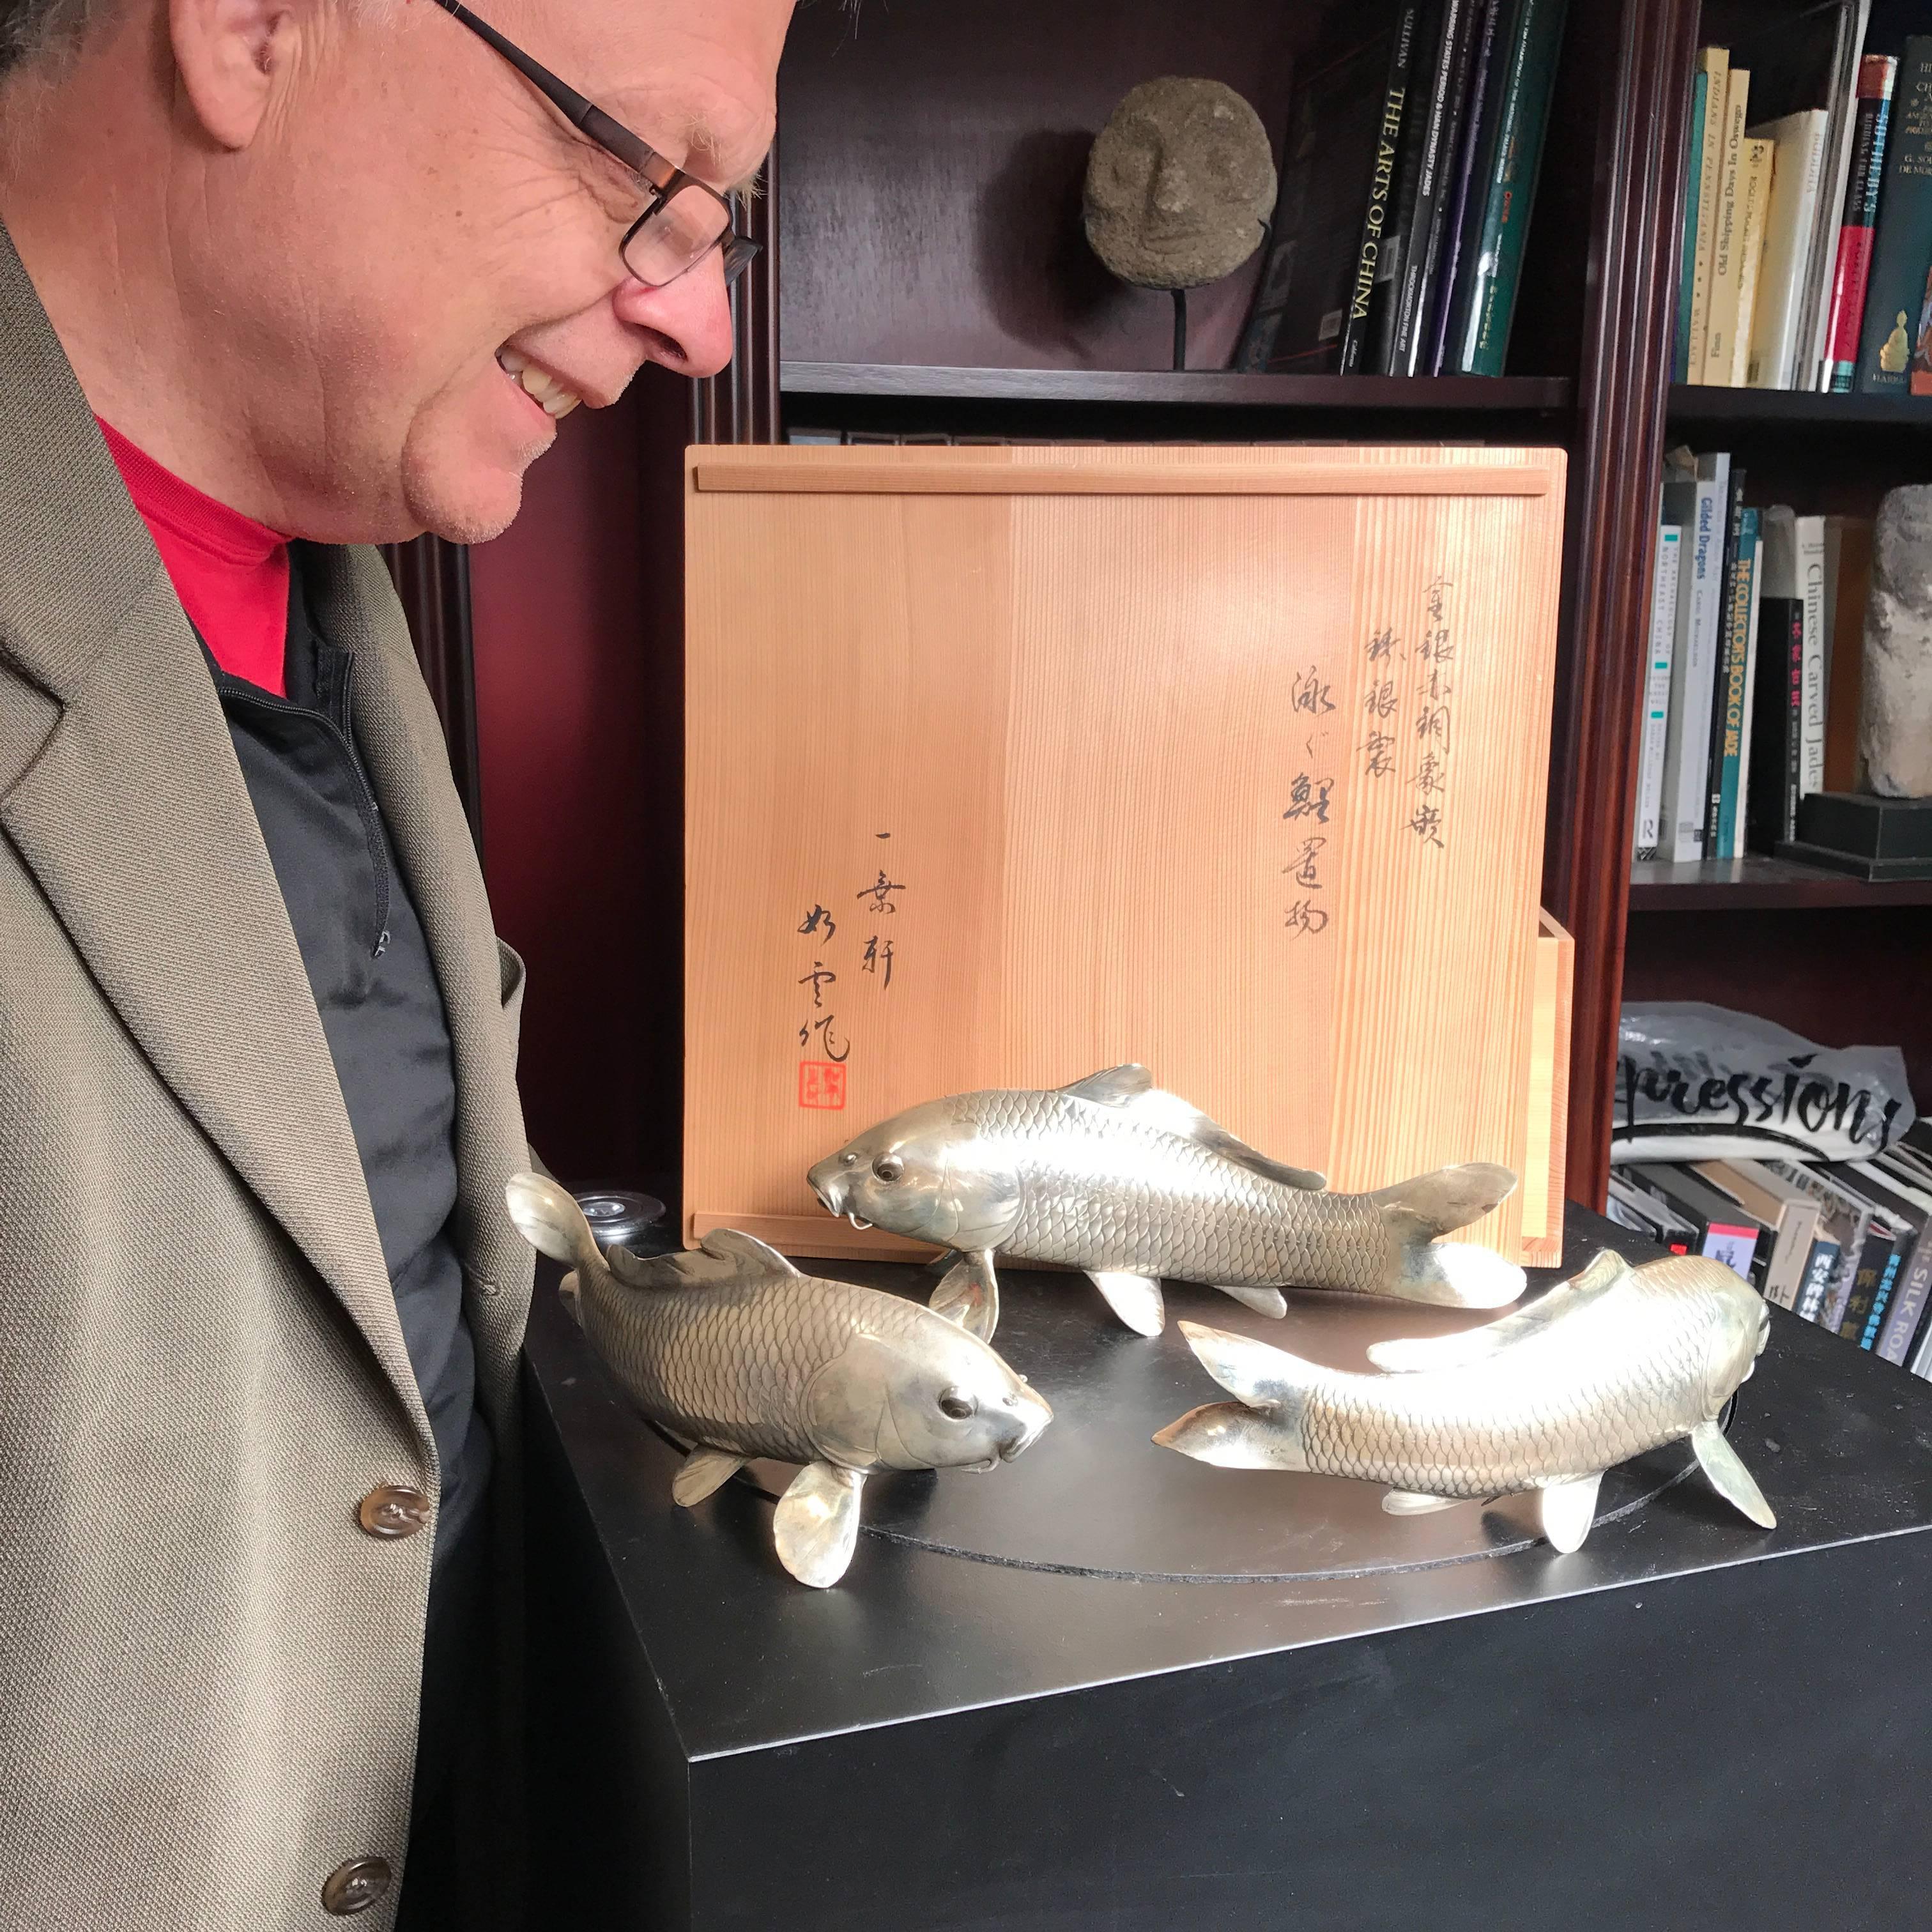 Mint, Signed, Boxed

A rare collection of three (3) superb heavy hand cast and signed silver bronze fish or KOI contained in their original signed kiriwood tomobako collector box. This is the finest quality the Japanese master craftsmen offer and